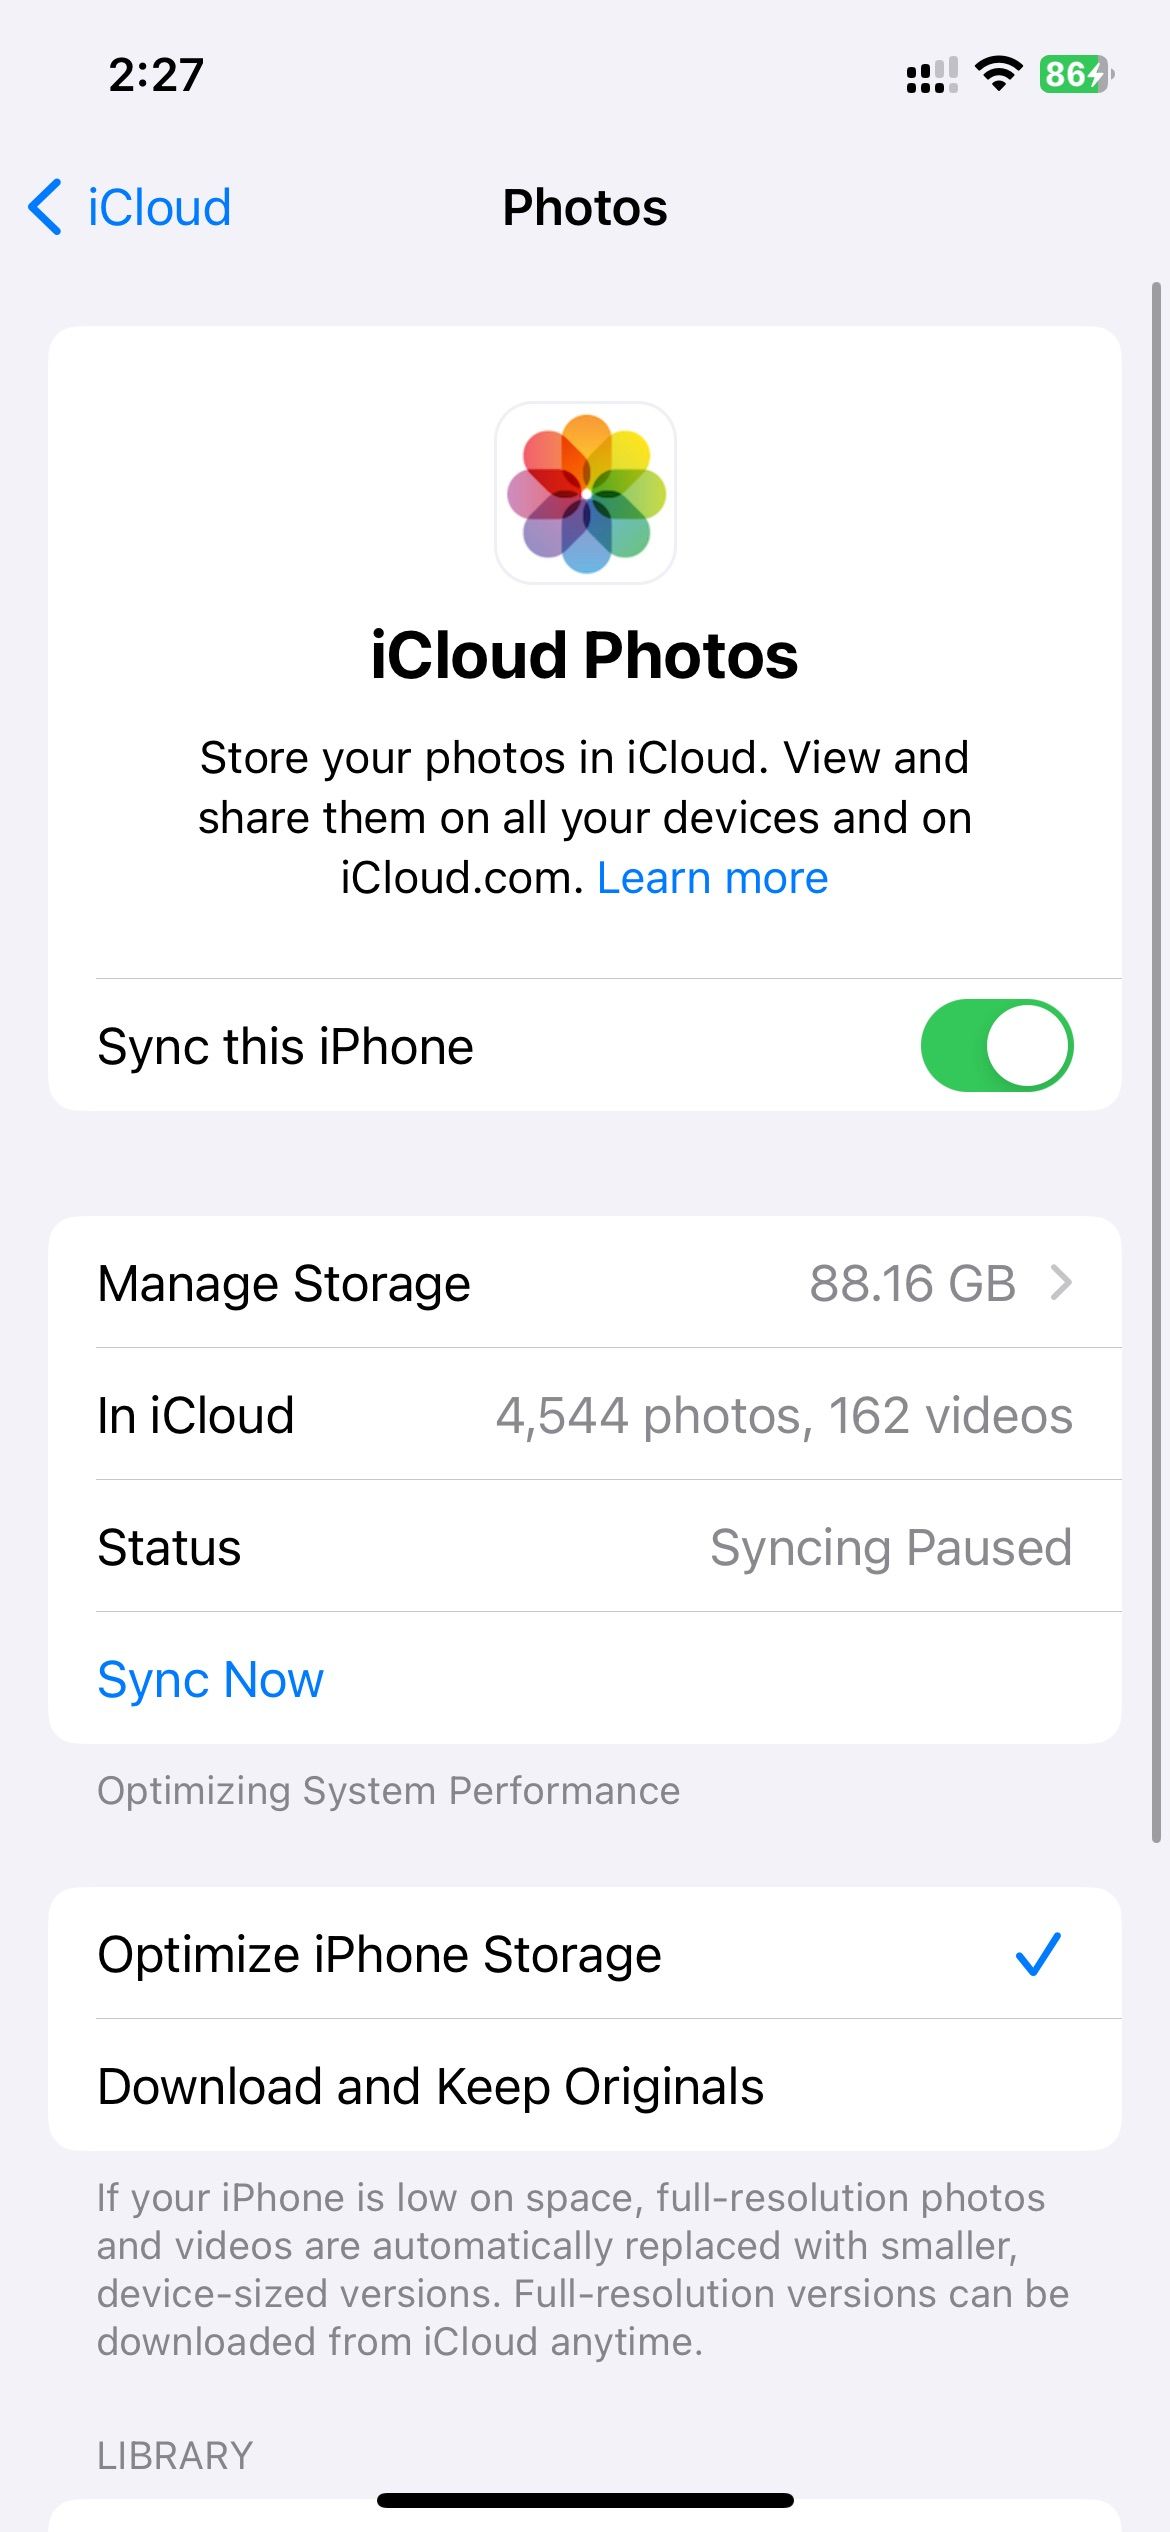 Sync this iPhone option for iCloud services